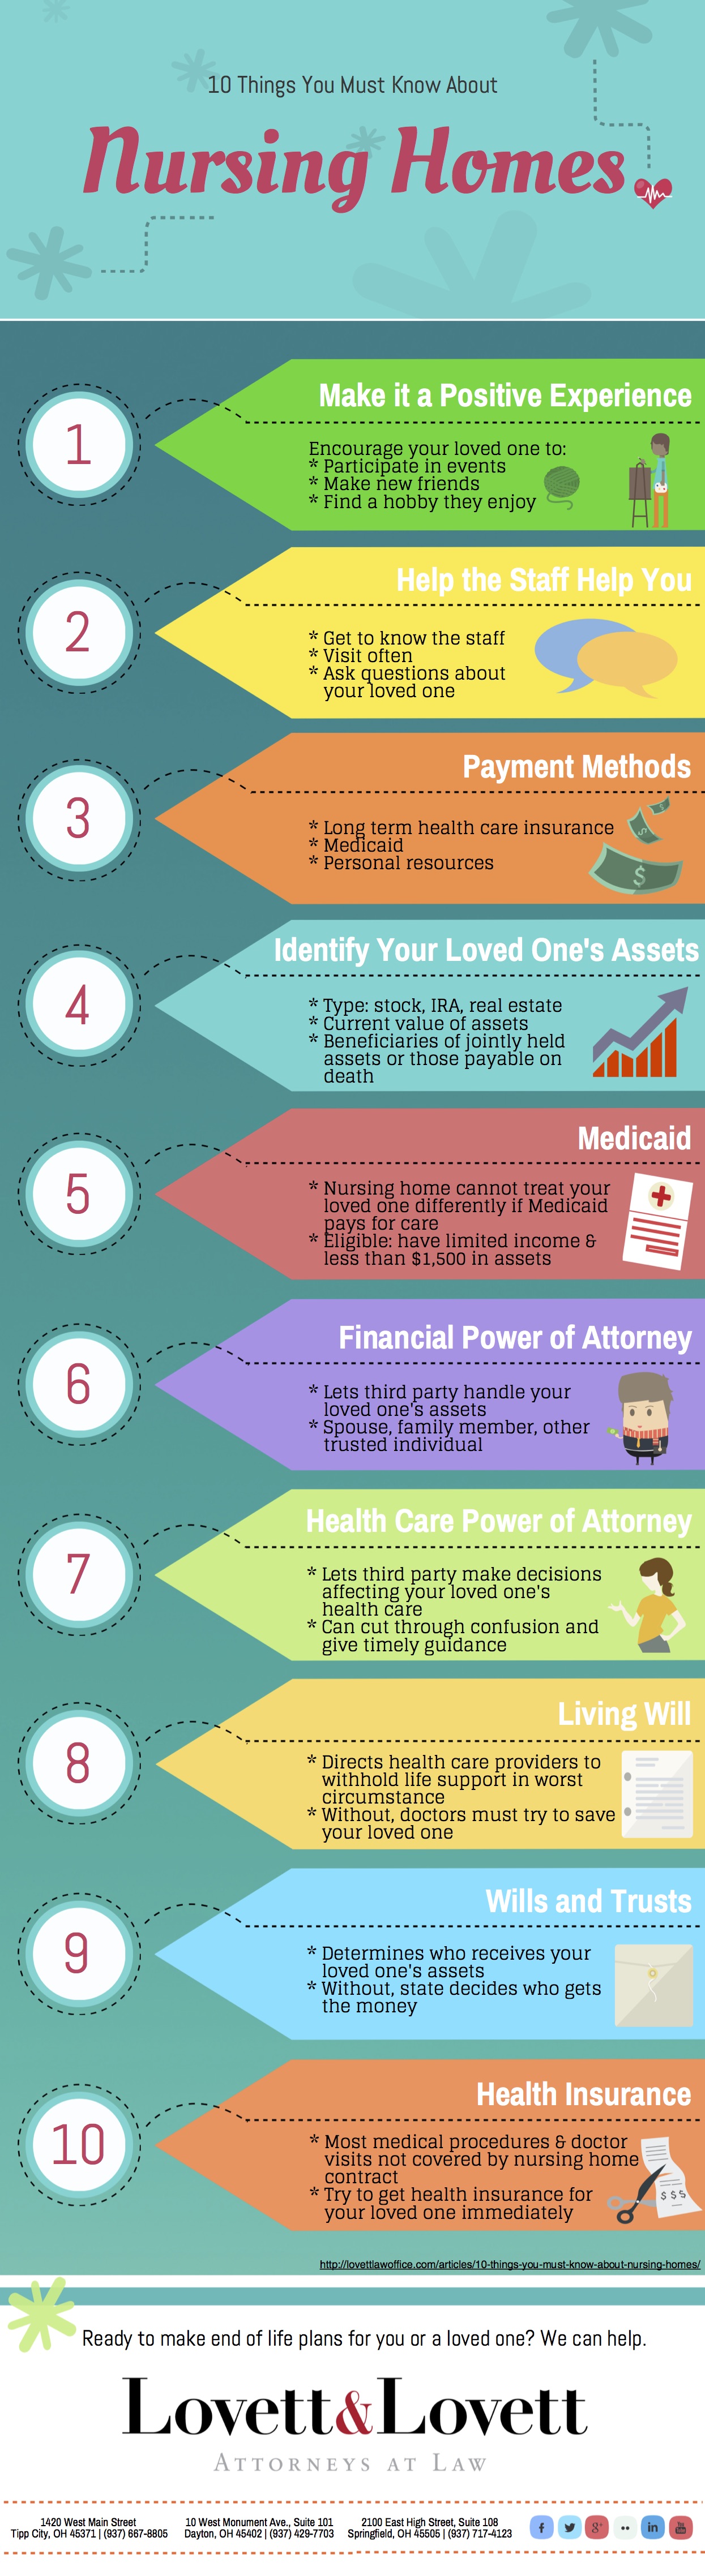 10 Things You Must Know About Nursing Homes